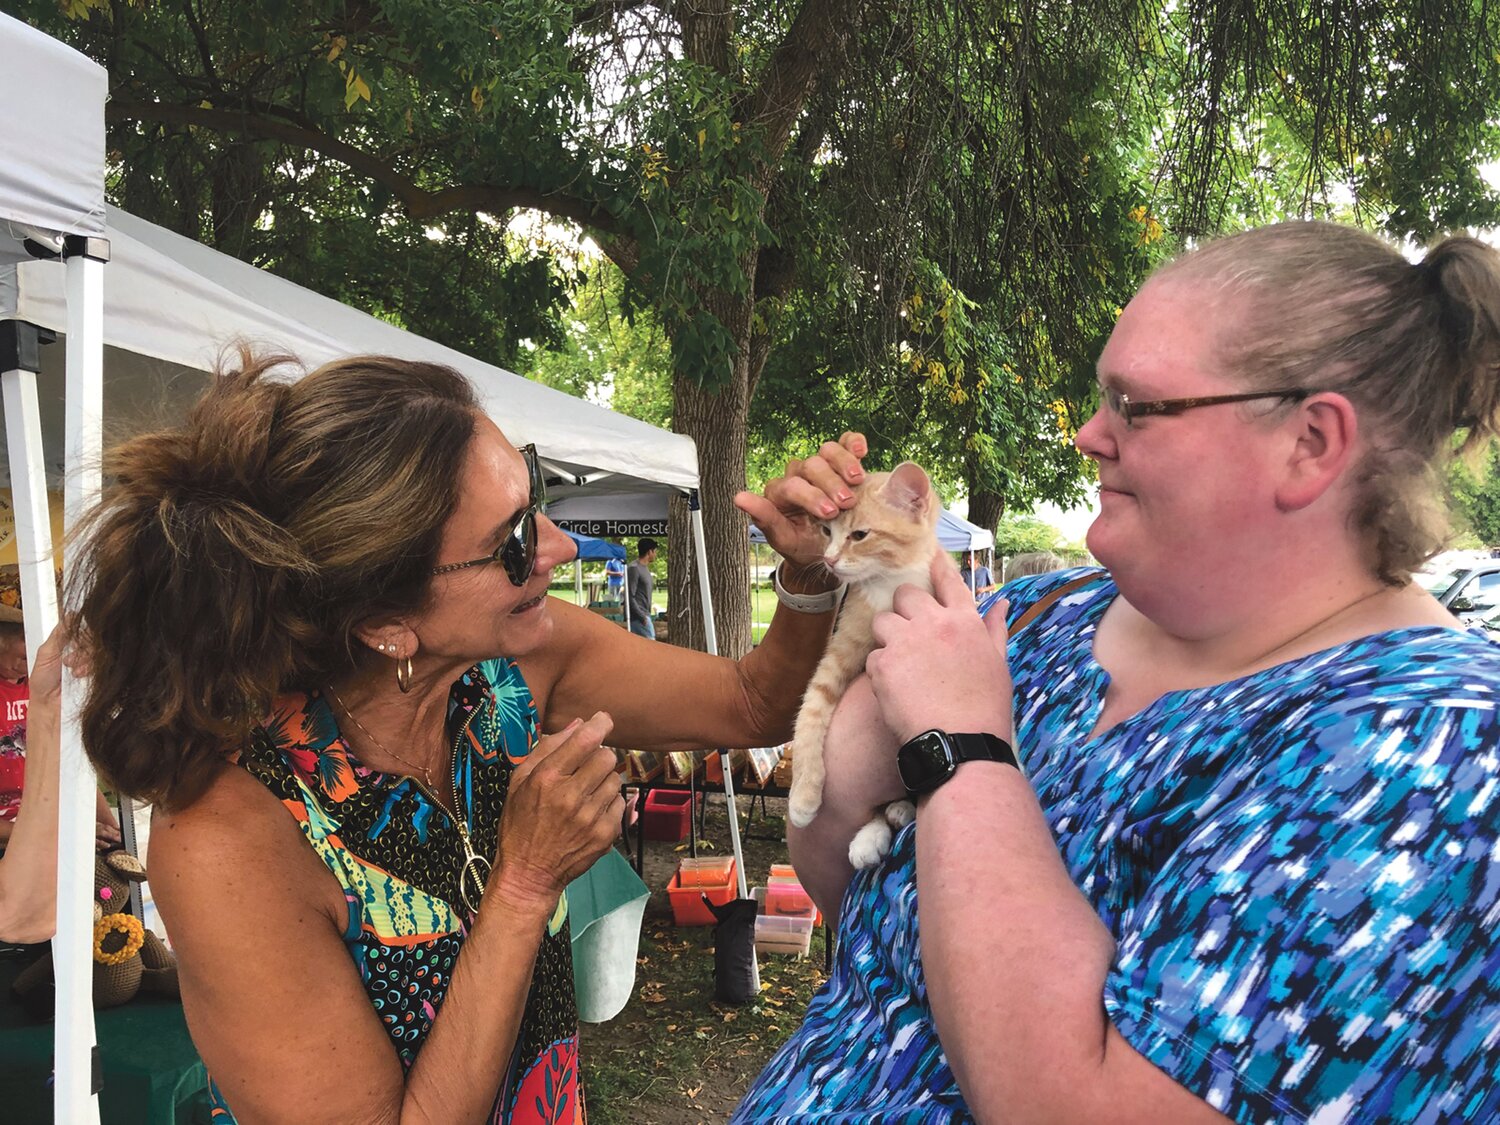 Dena Ramirez-Halle of Wenatchee (left), and Sara Nagel of Whidbey Island (right) hold Buffy (Buff), one of the kittens being taken care of by April Leaf of Chelan Valley Feral Cat Project, at the Chelan Farmers Market on September 7.
KATIE LINDERT/WARD MEDIA